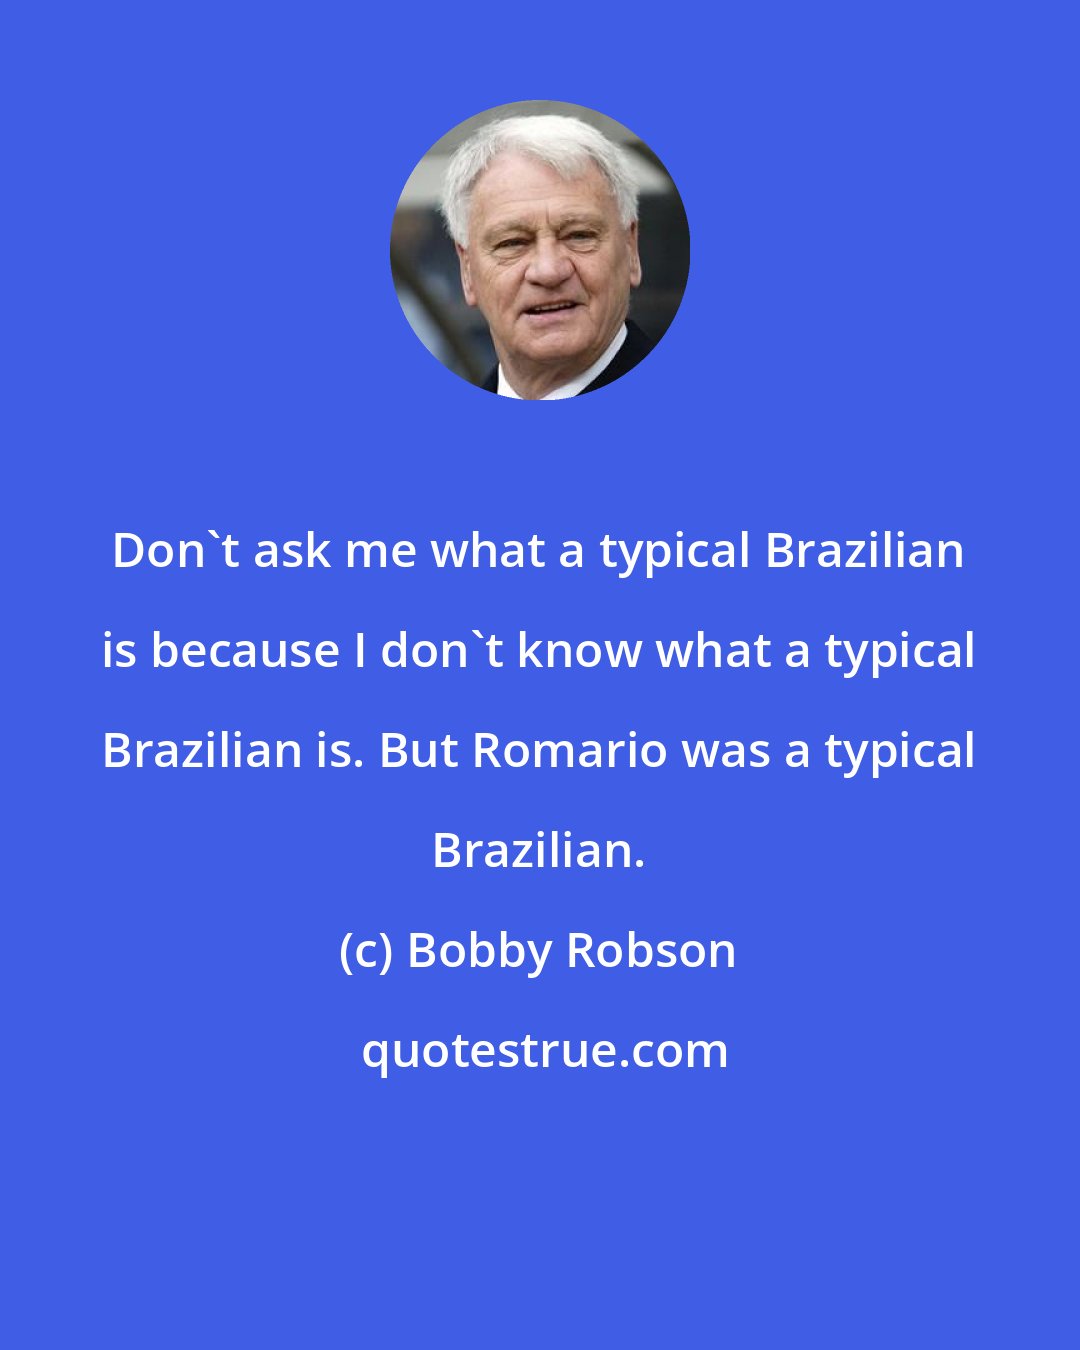 Bobby Robson: Don't ask me what a typical Brazilian is because I don't know what a typical Brazilian is. But Romario was a typical Brazilian.